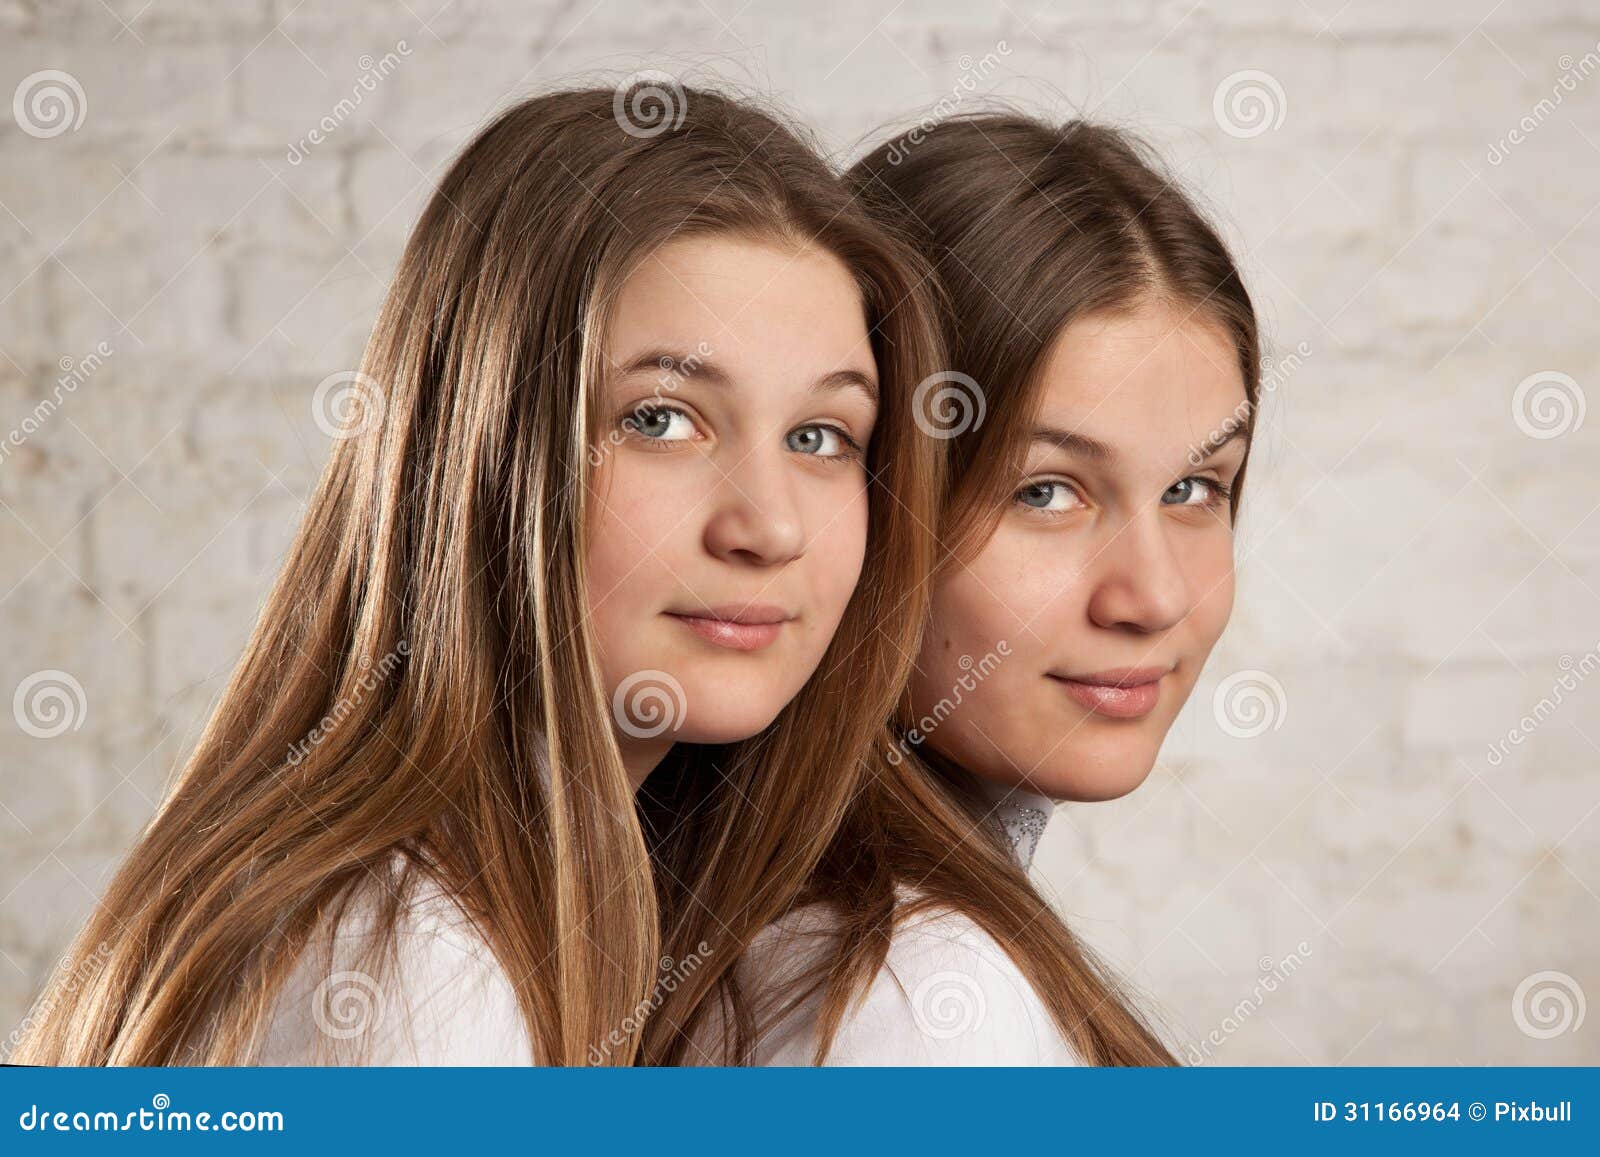 fraternal twins boy and girl teenagers tumblr